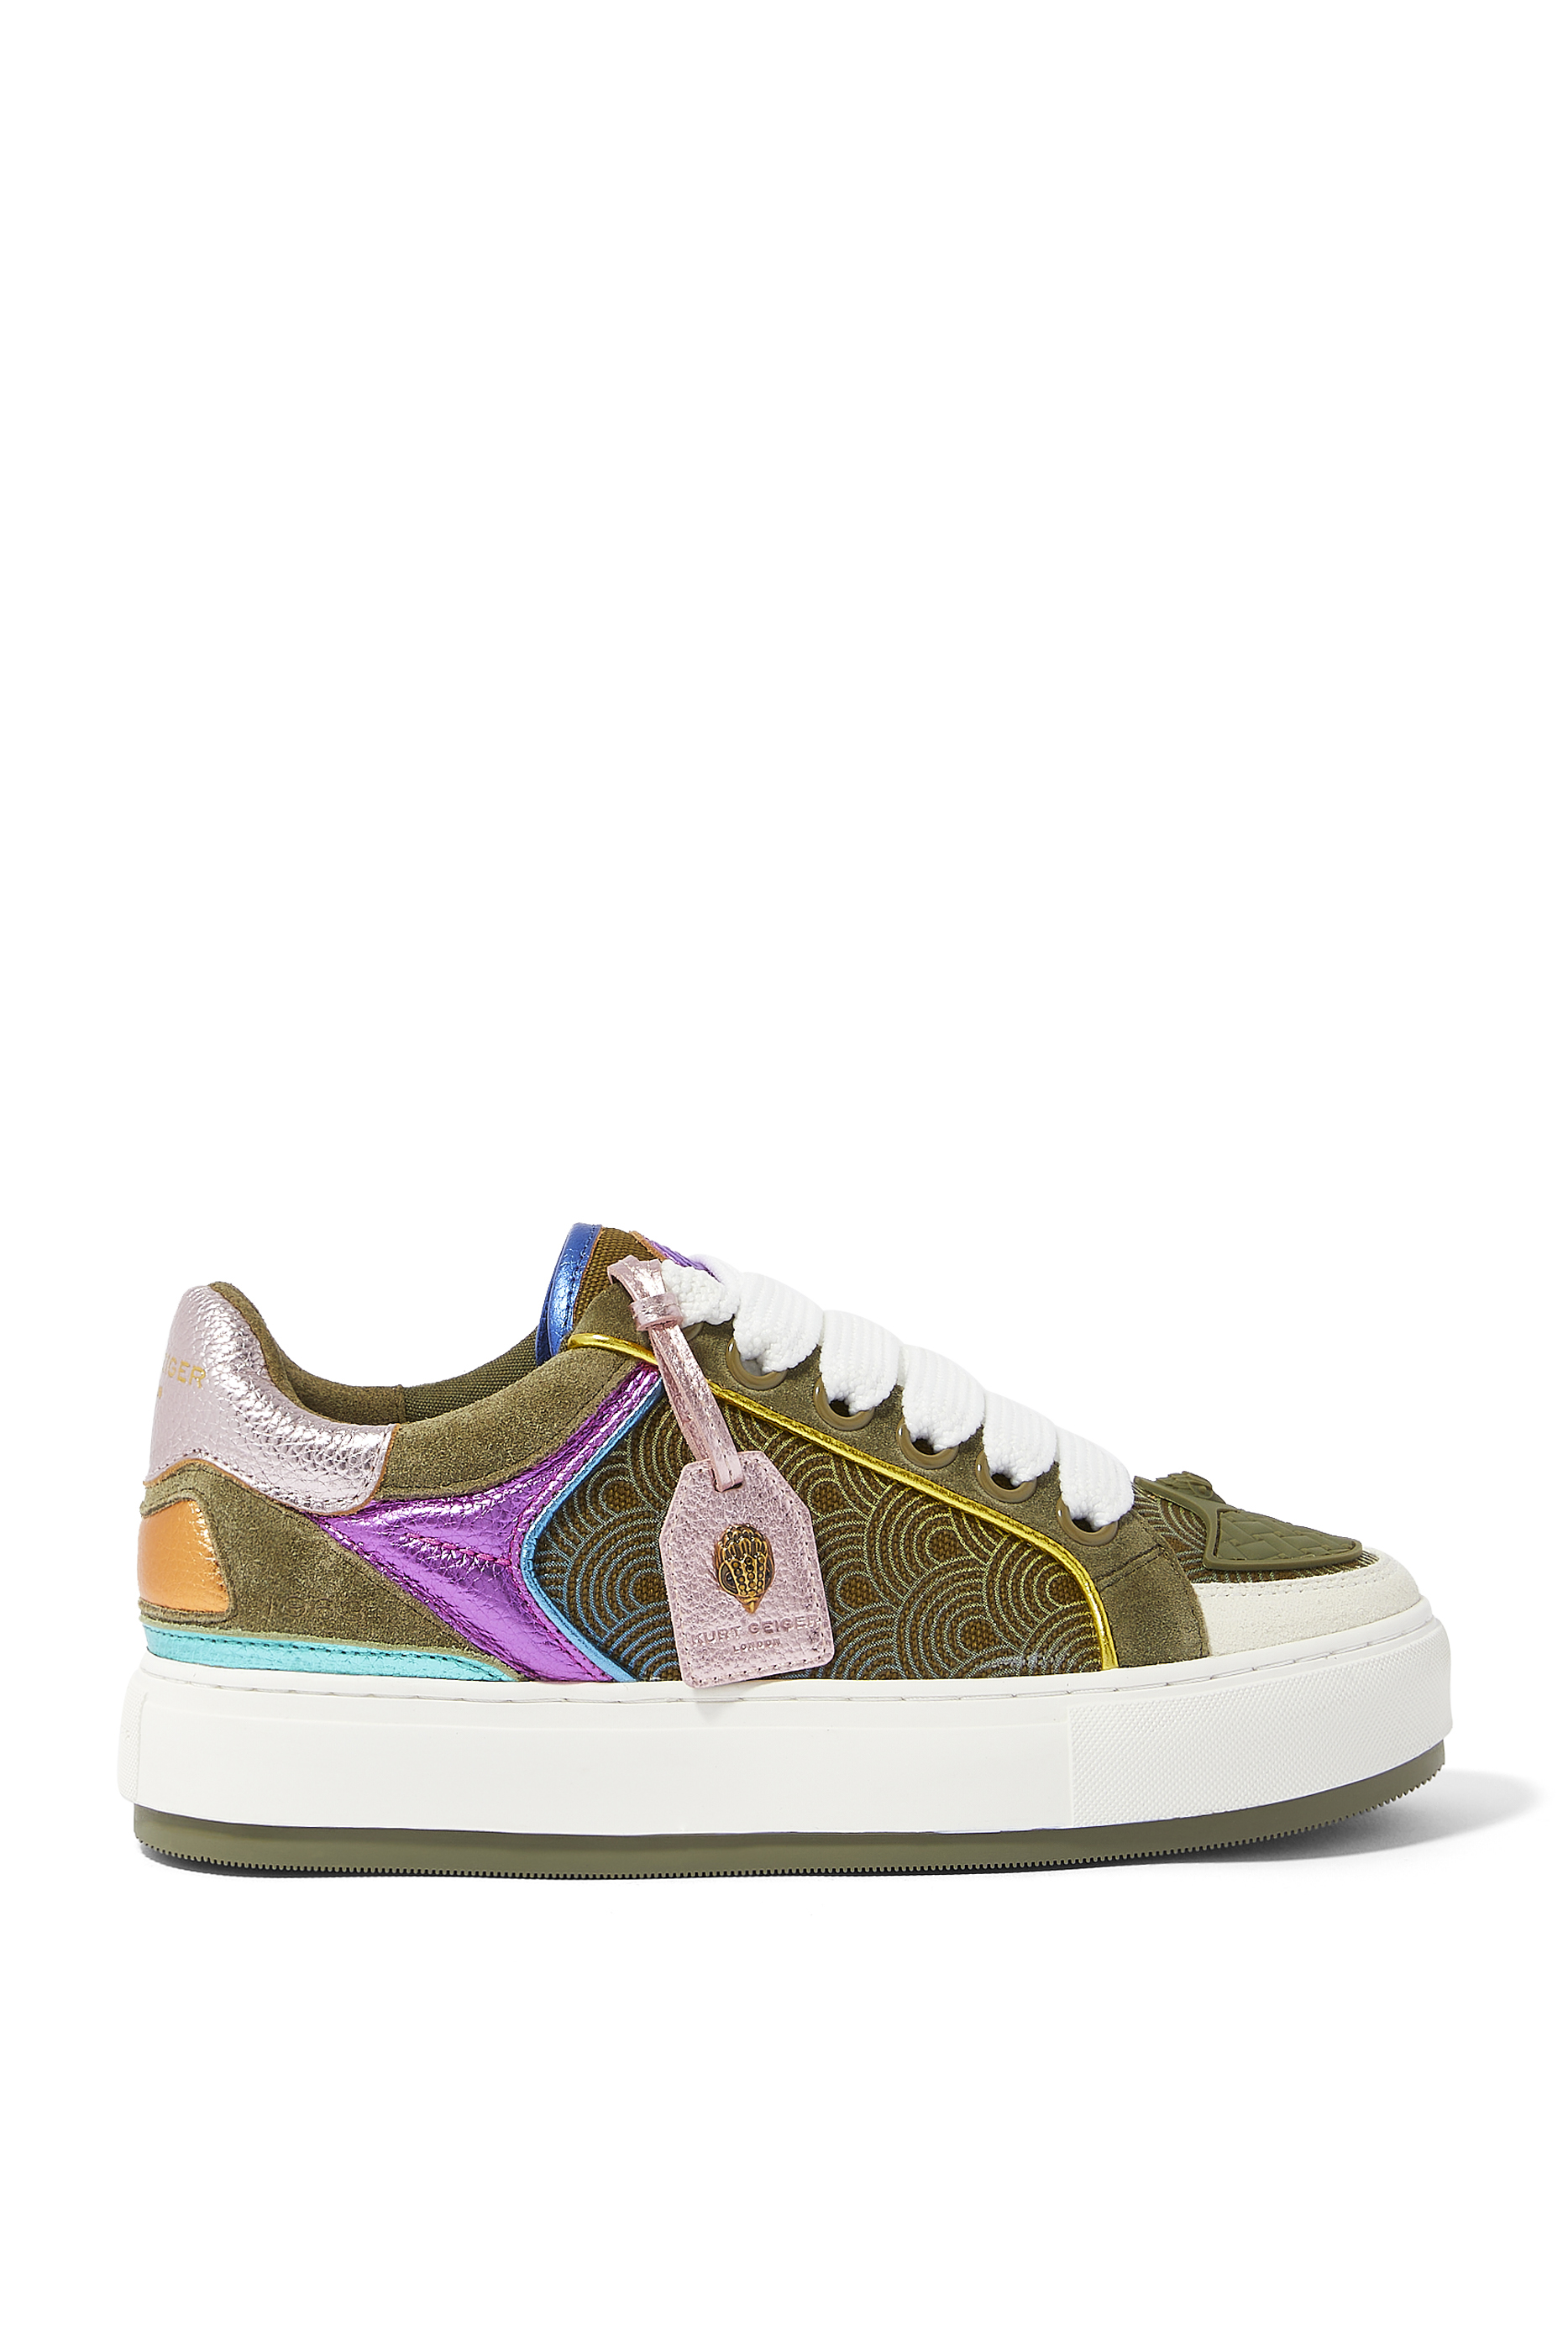 Buy Kurt Geiger Southbank Tag Leather Sneakers for Womens ...